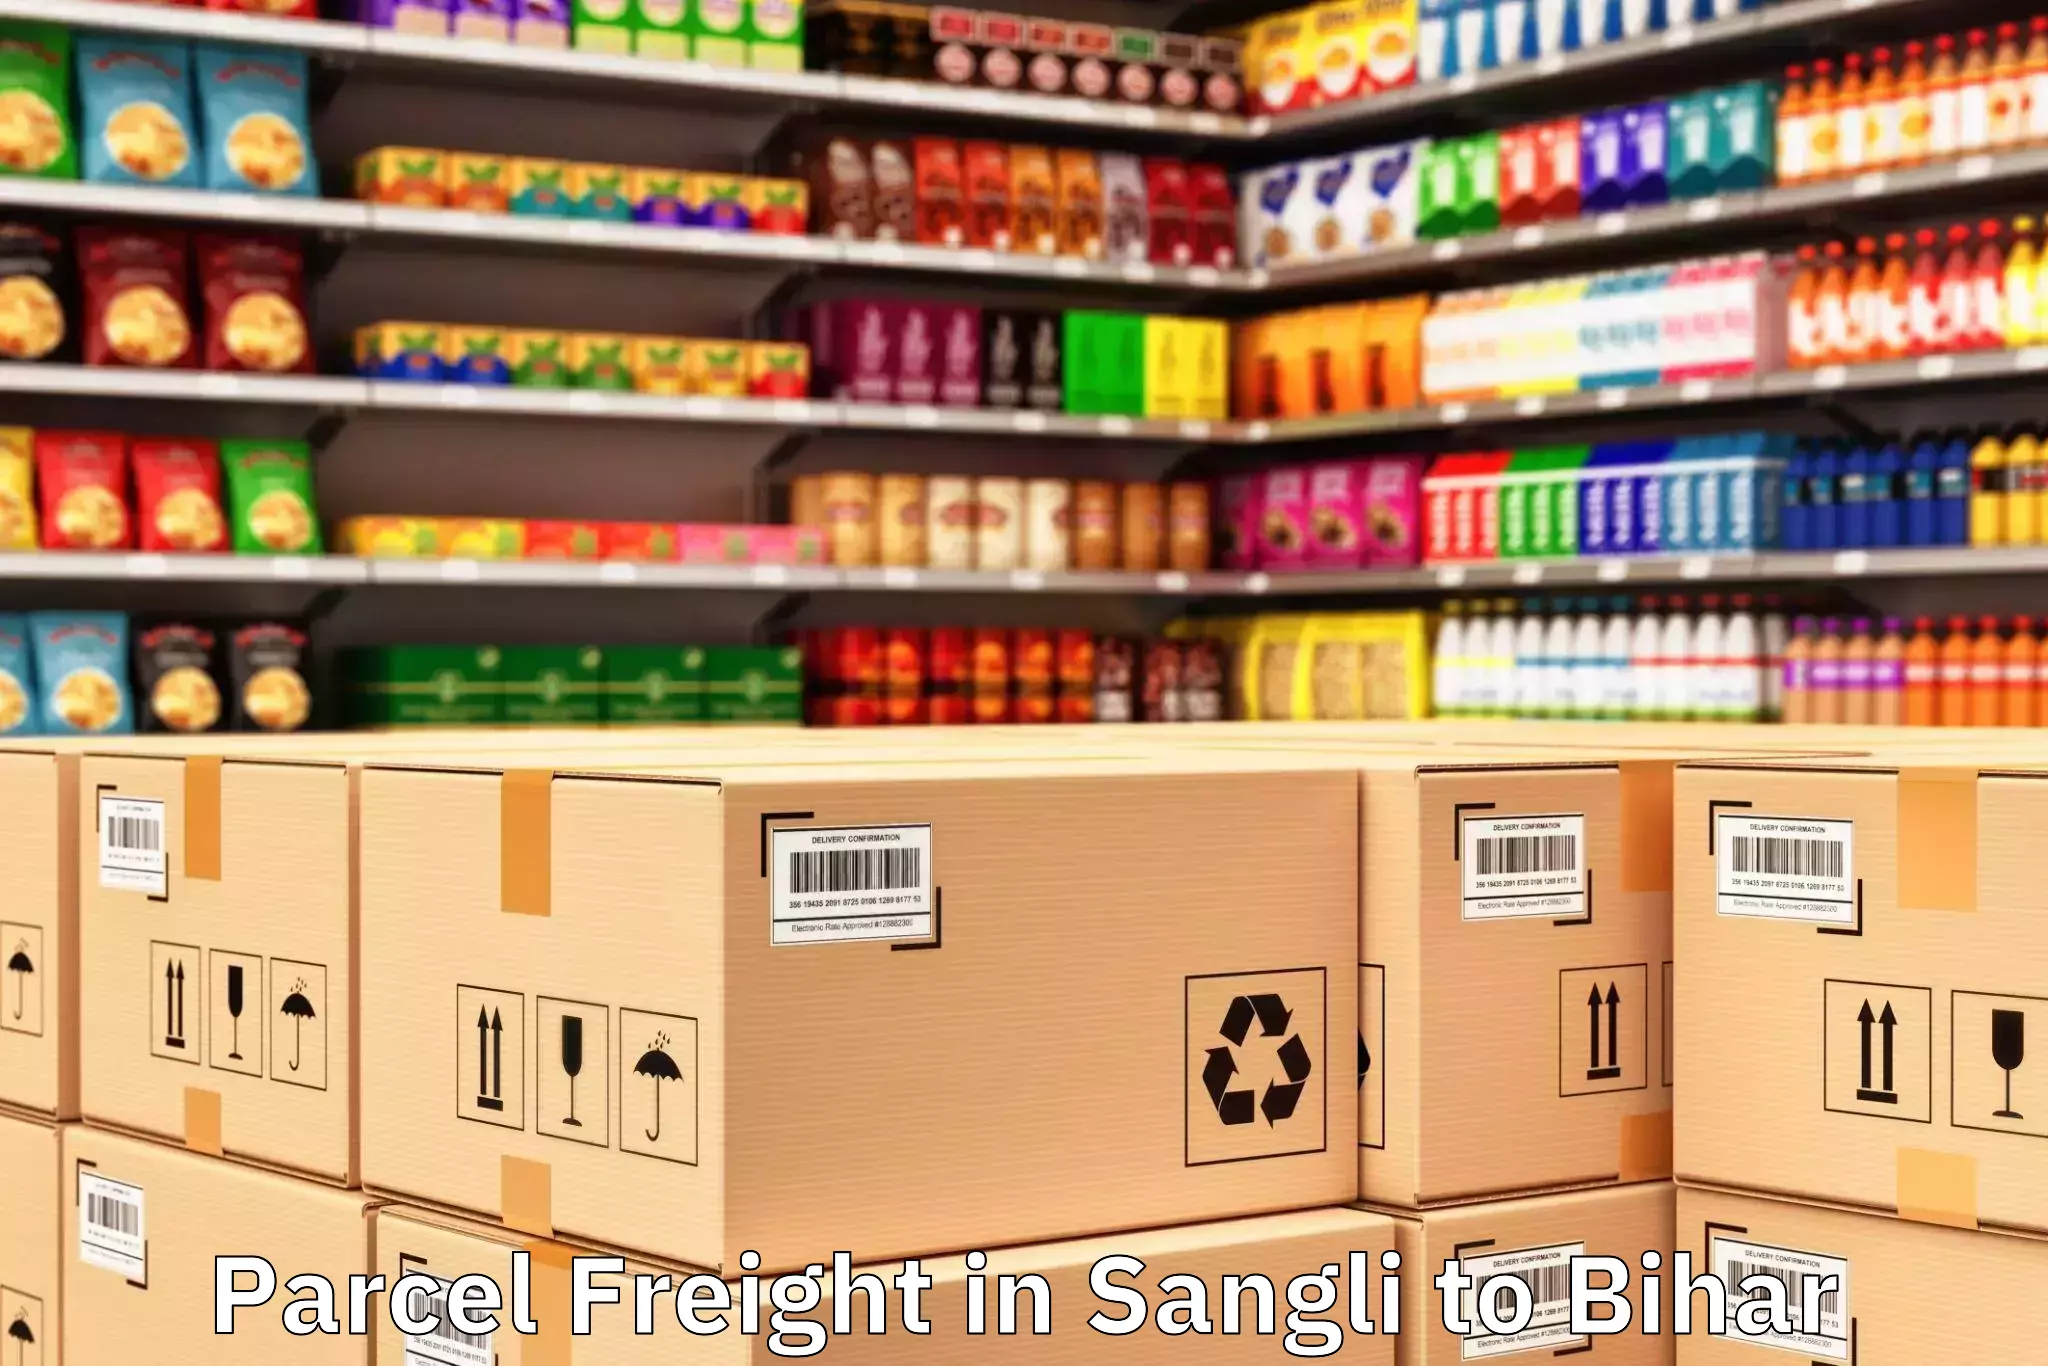 Top Sangli to Mahnar Parcel Freight Available